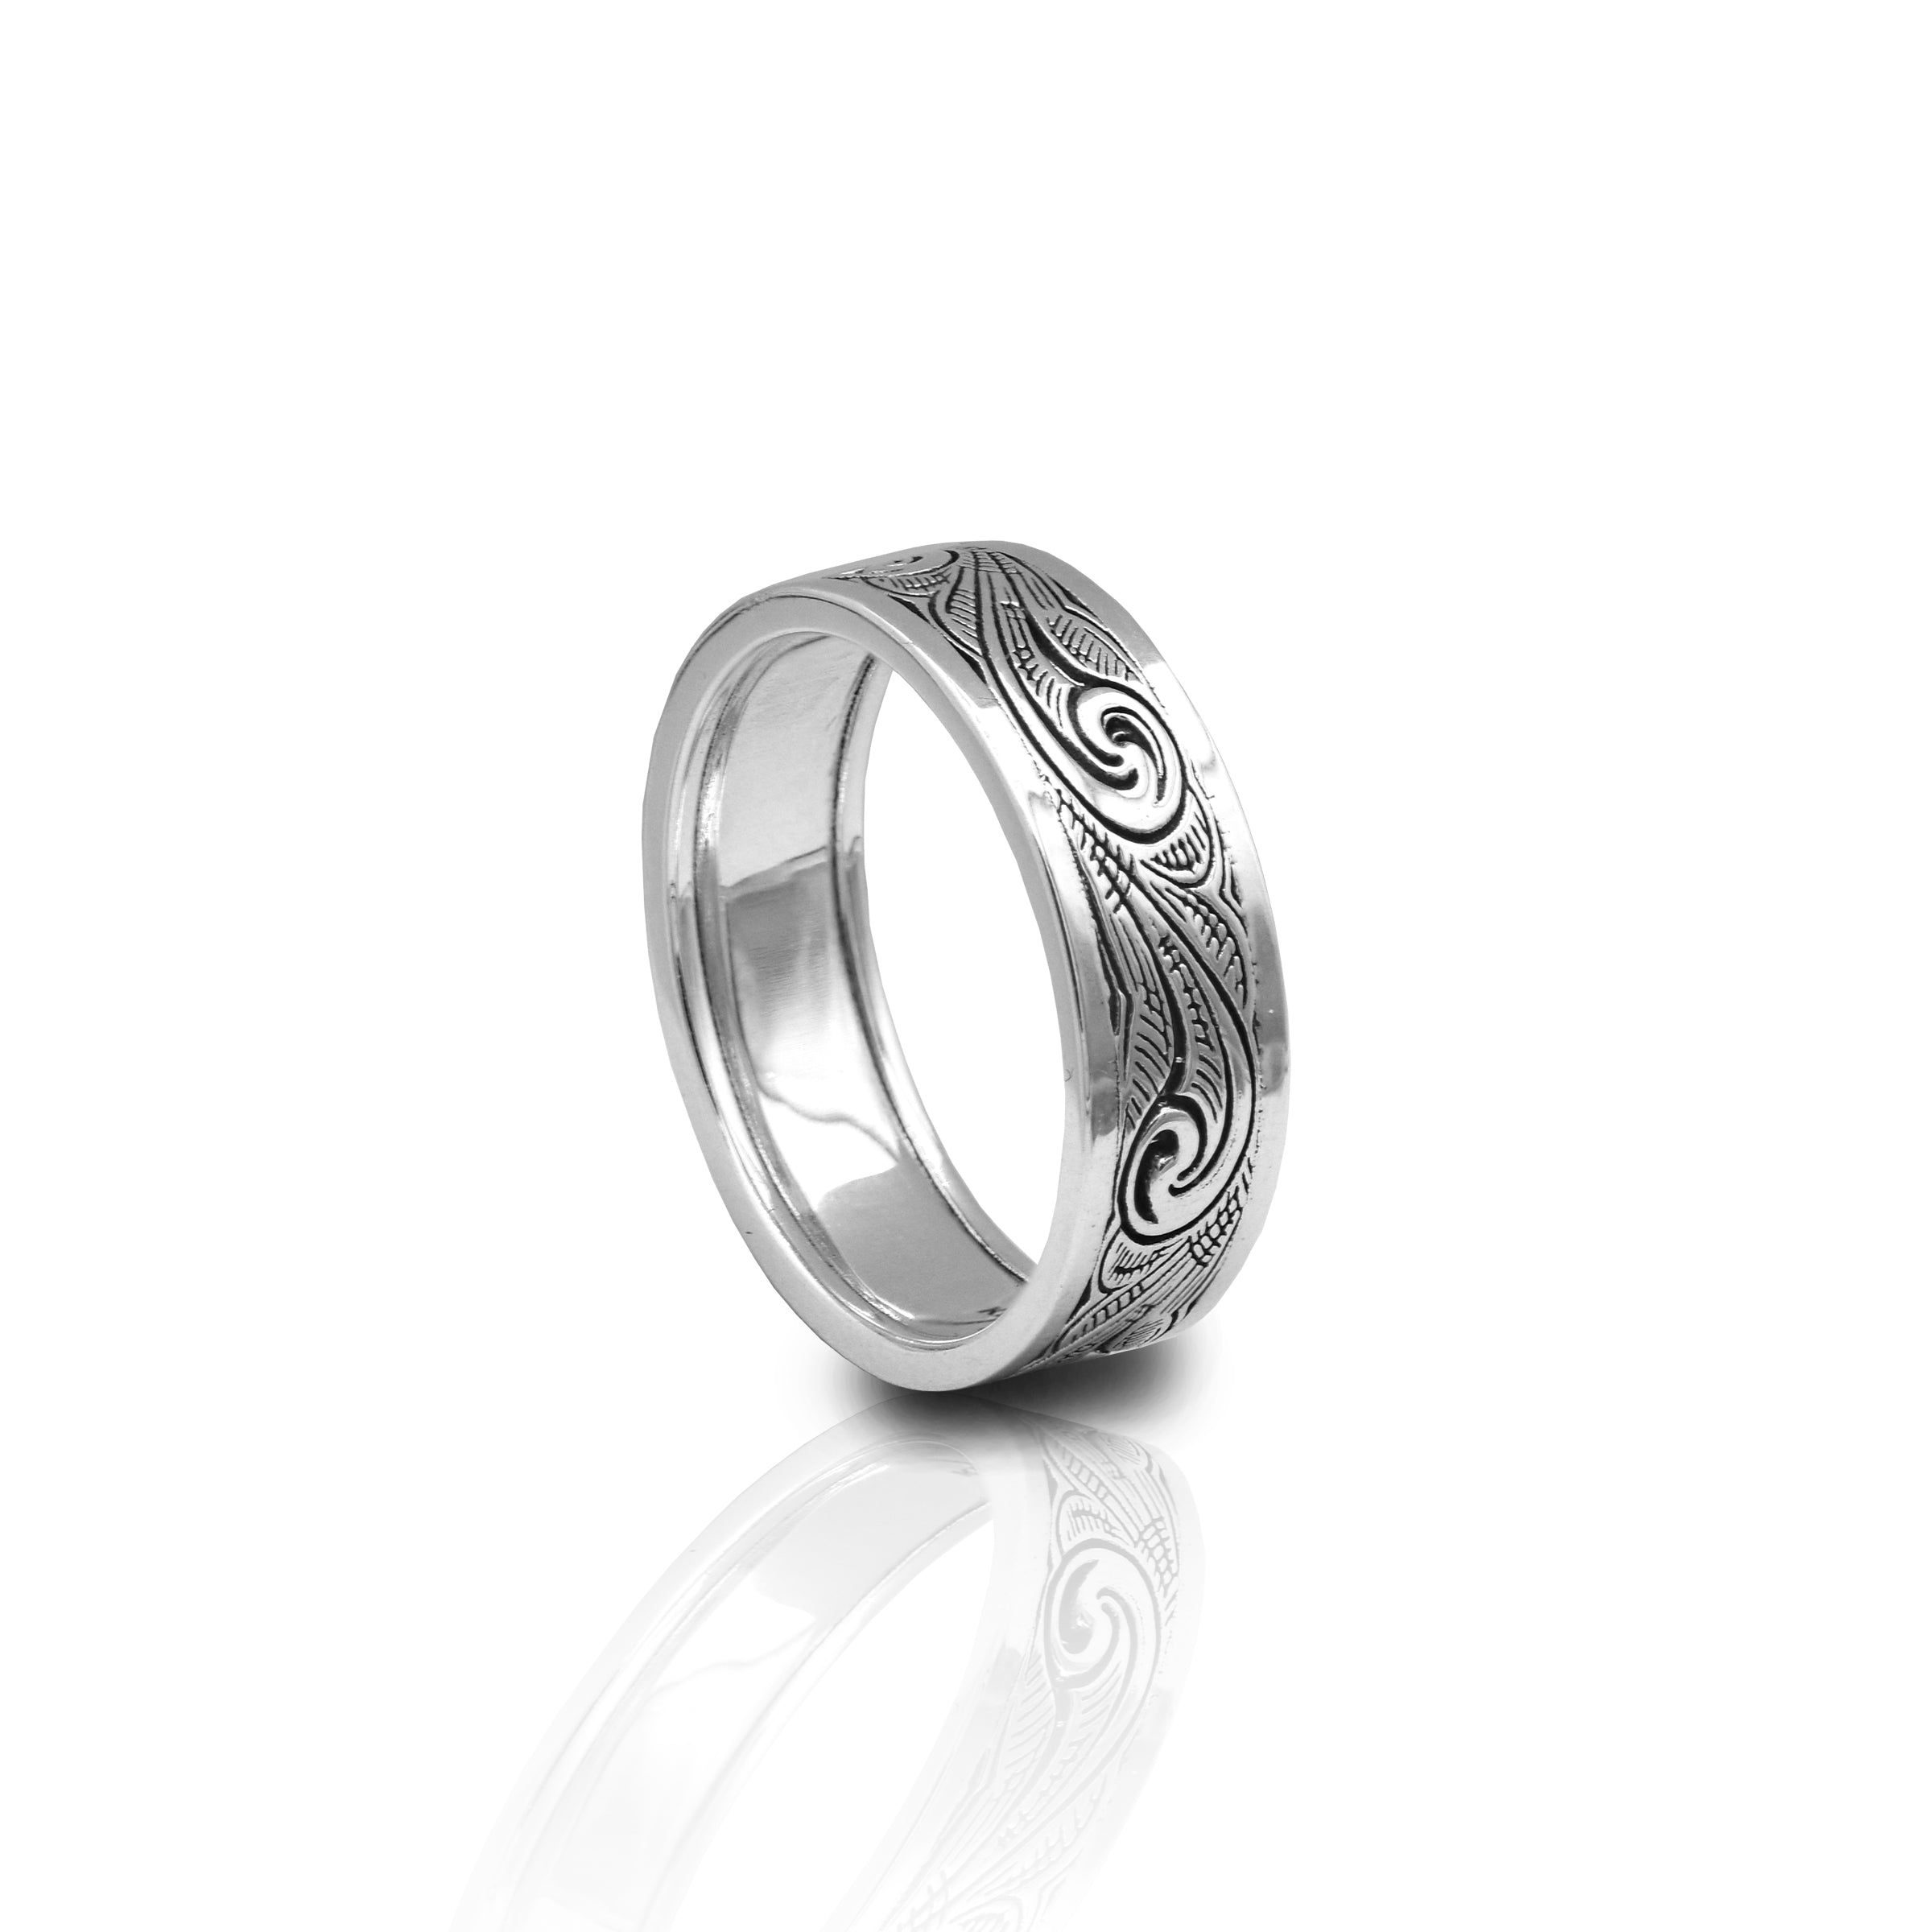 Buy Silver-Toned Rings for Men by PALMONAS Online | Ajio.com